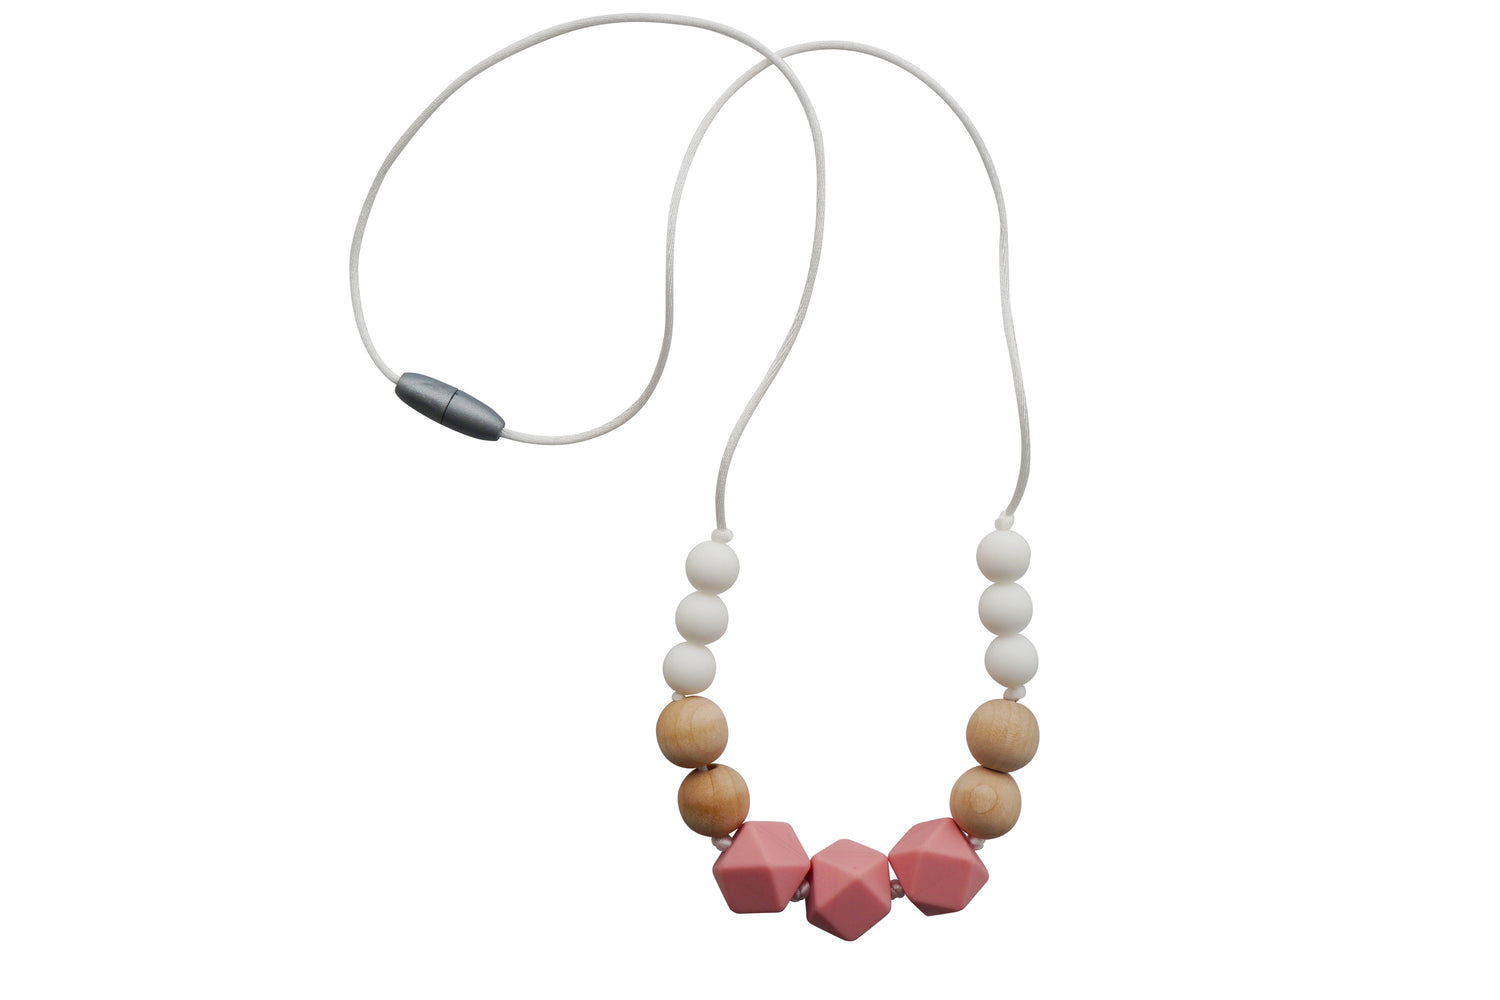 Rose silicone and wood teething necklace